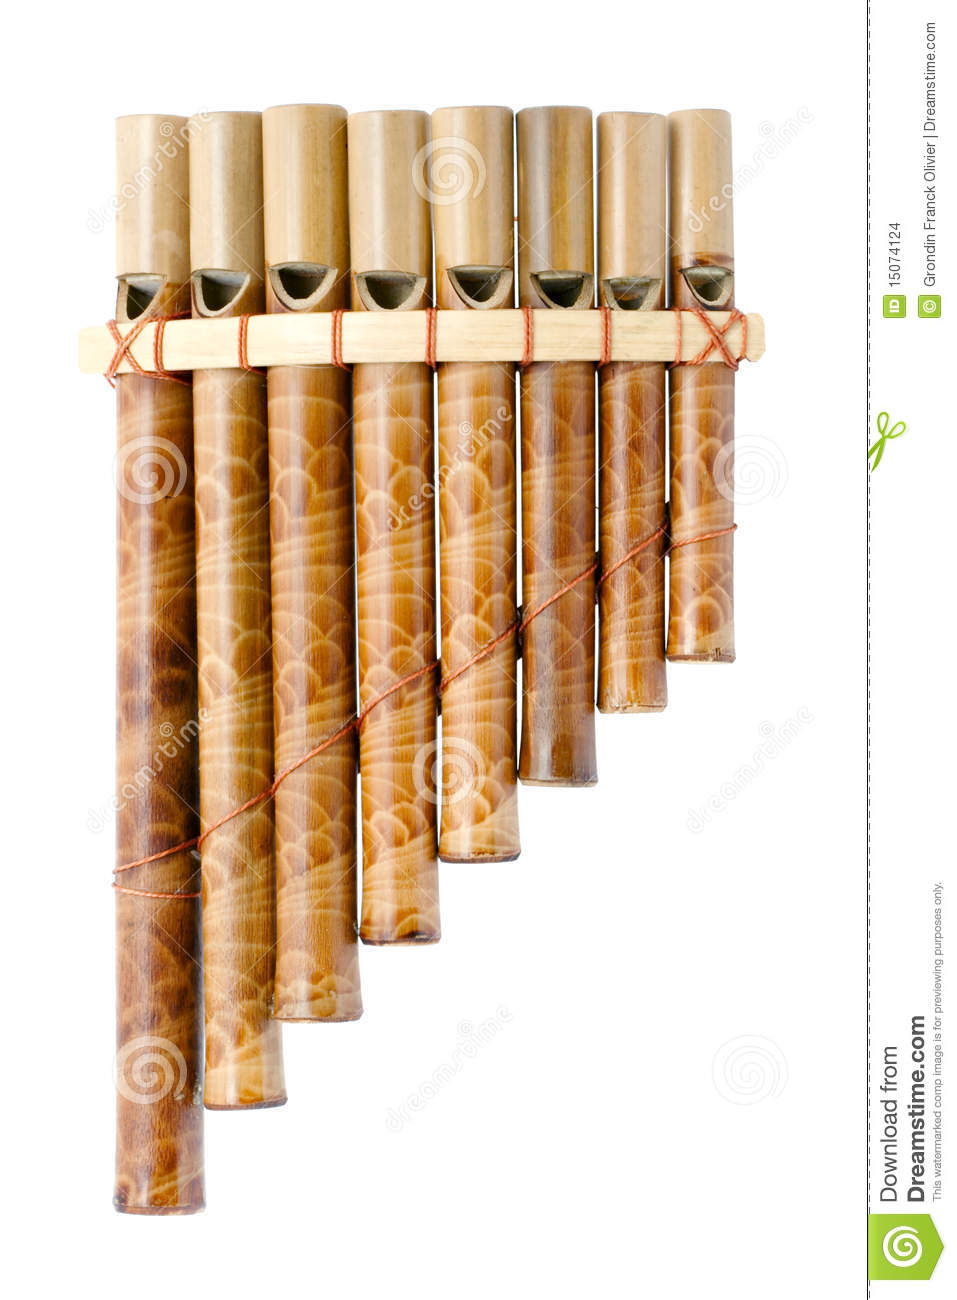 Bamboo Panpipes Stock Images.